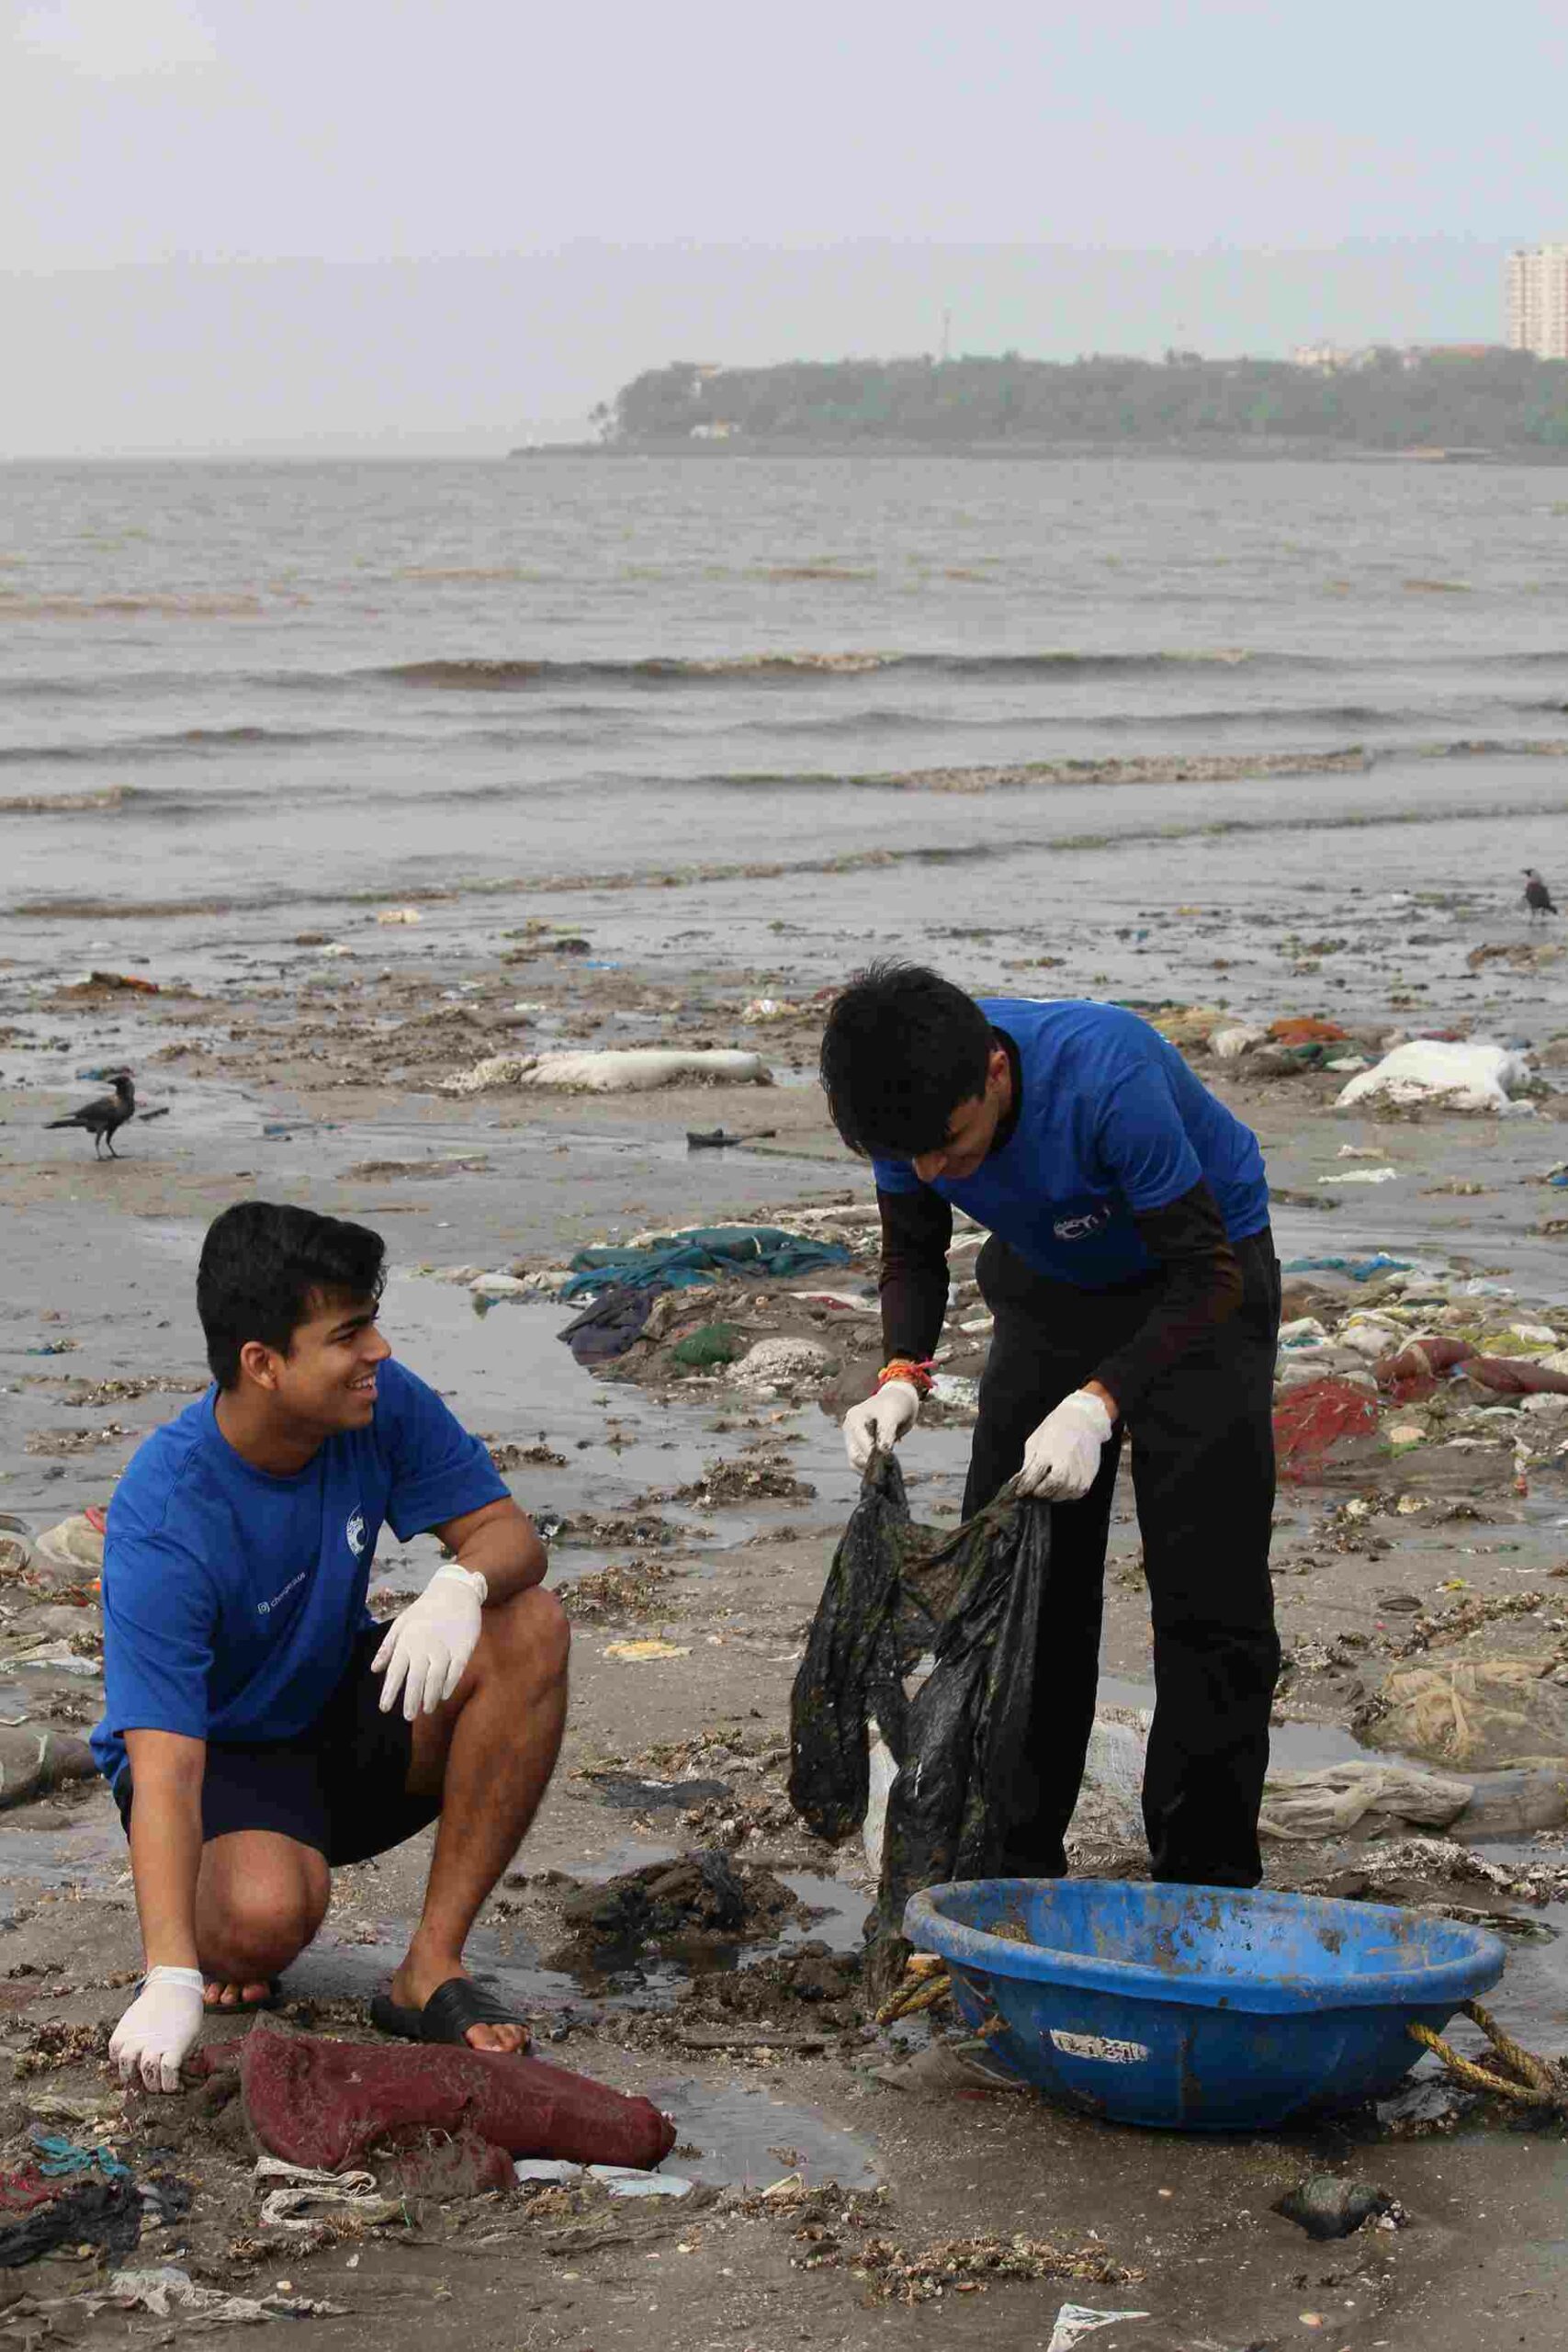 Change Is Us is a beach cleanup initiative started by two engineering students Akshat and Shubh in 2019